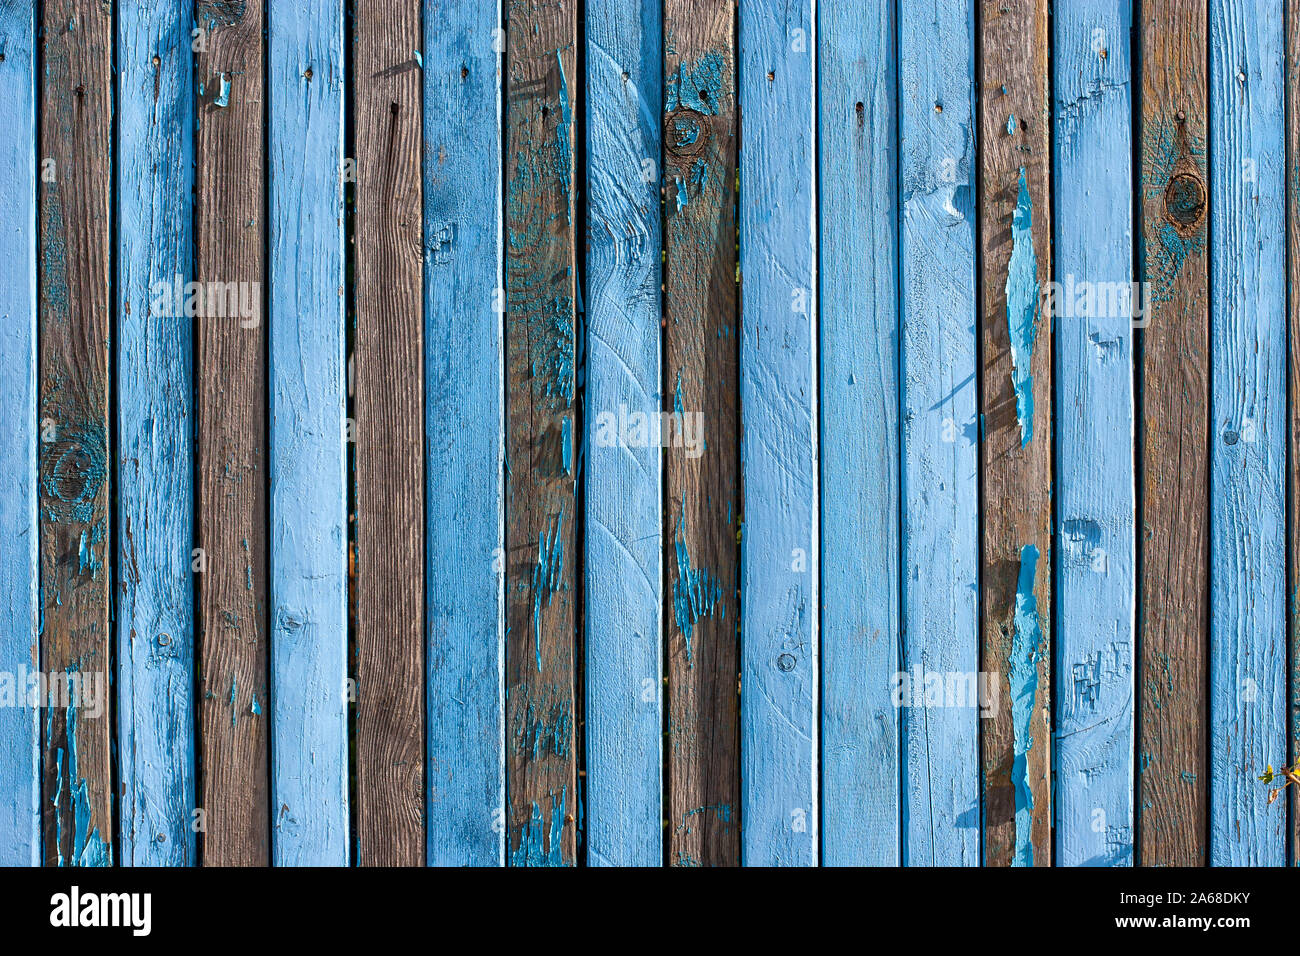 A fence of narrow old blue planks with a row of nails. On many boards there is no paint, a lot of knots, arranged vertically. Stock Photo